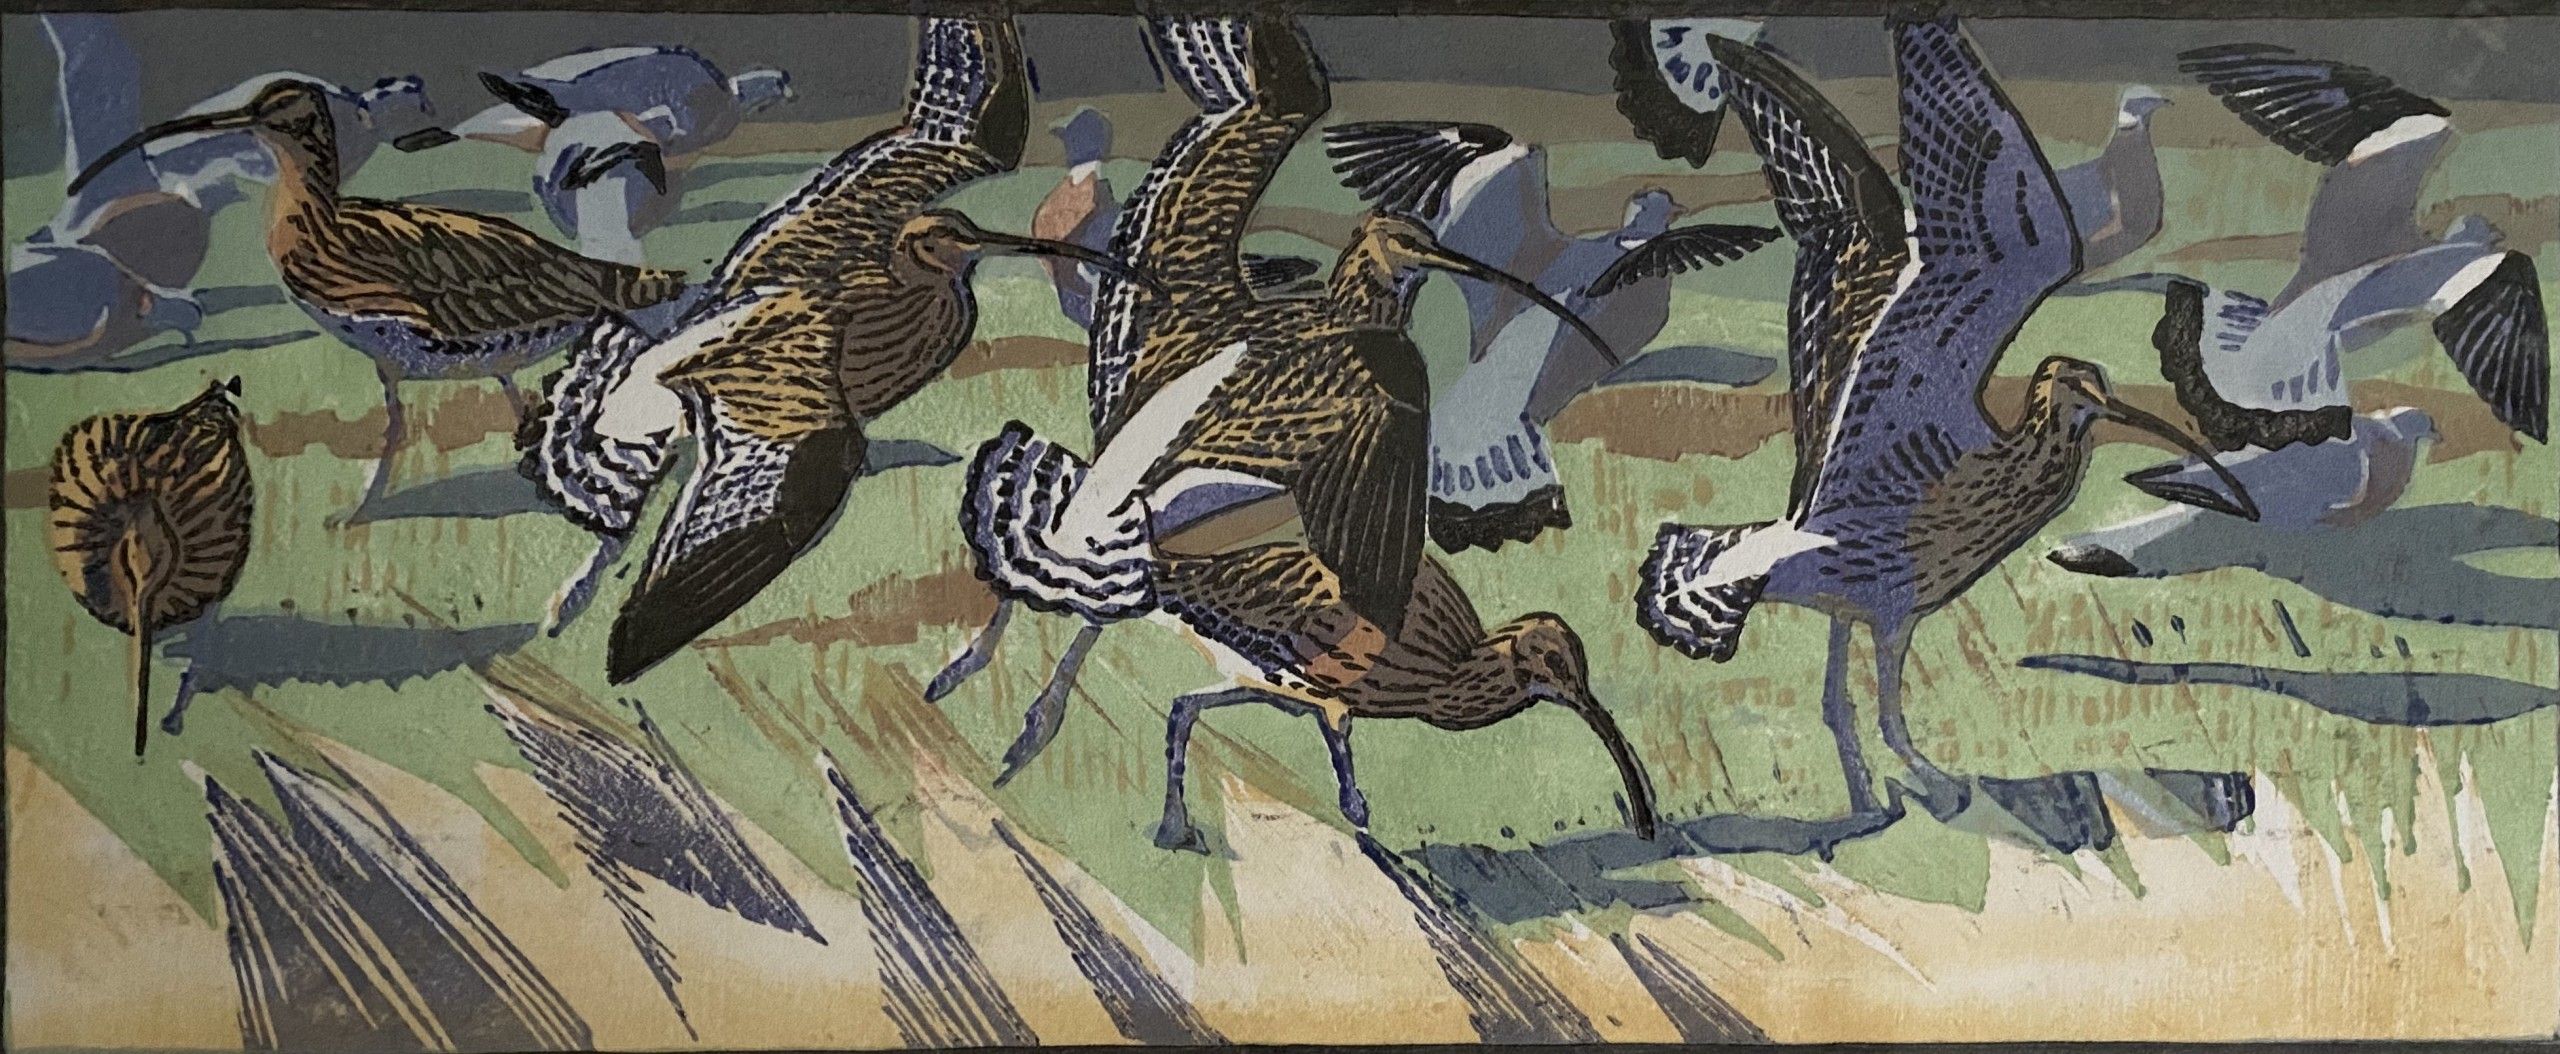 Curlews and Woodpigeons by Robert Greenhalf